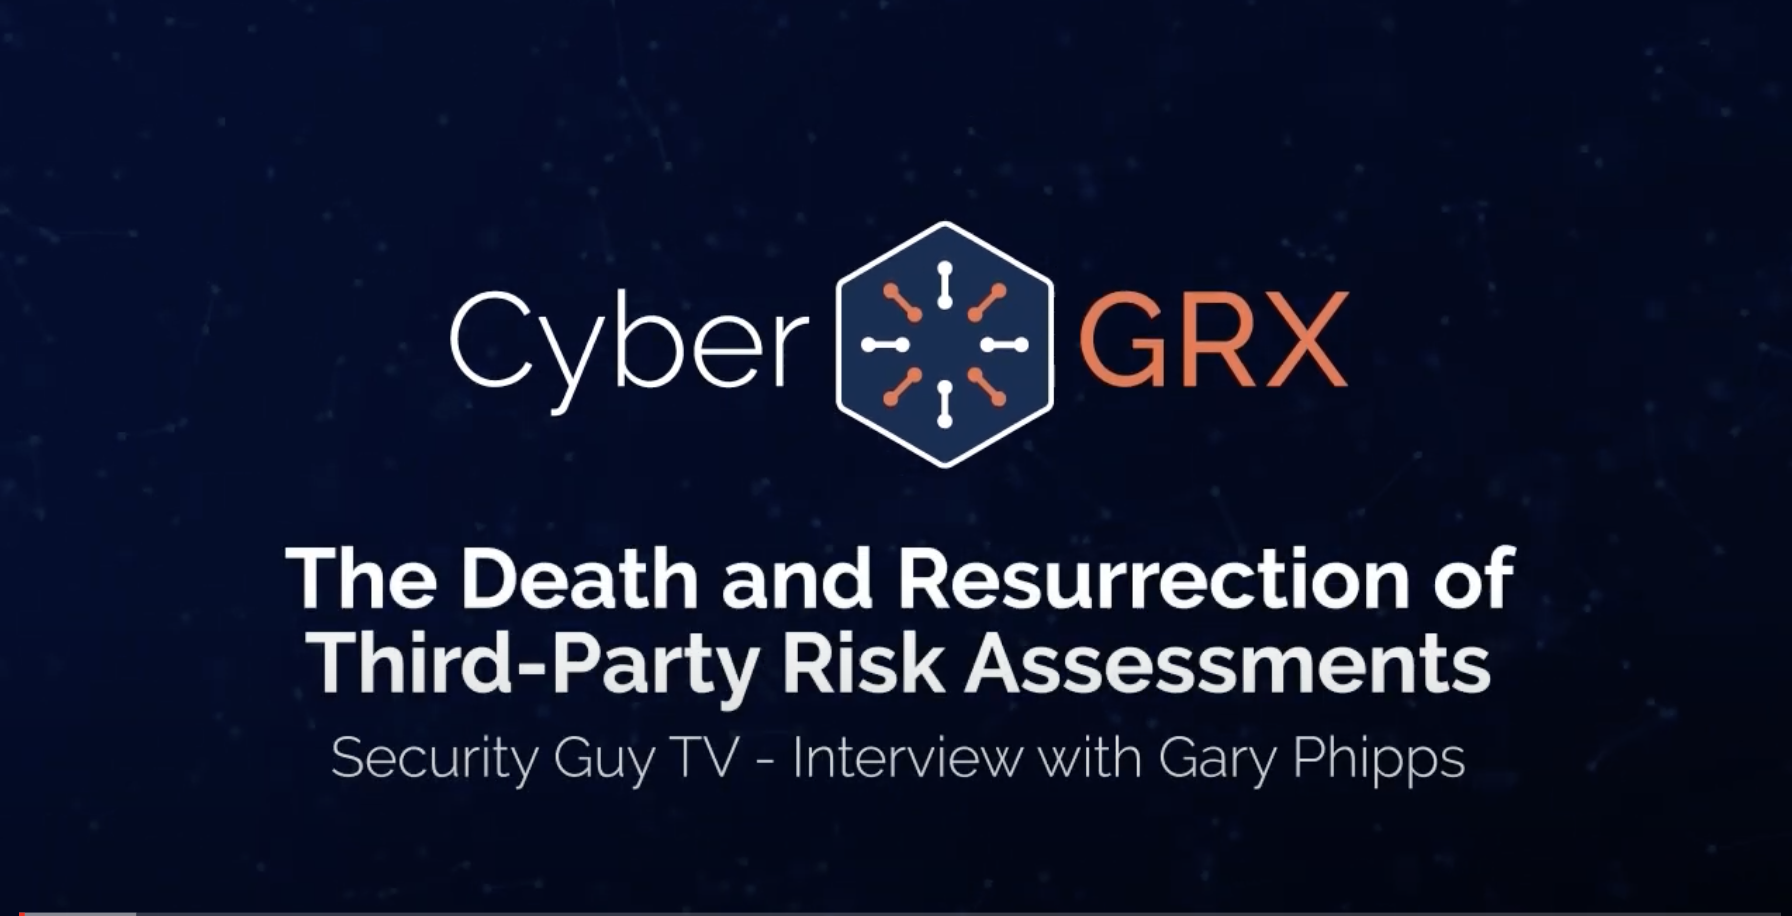 Third-Party Risk Assessments: Are They Effective Cyber Risk Intelligence Tools?